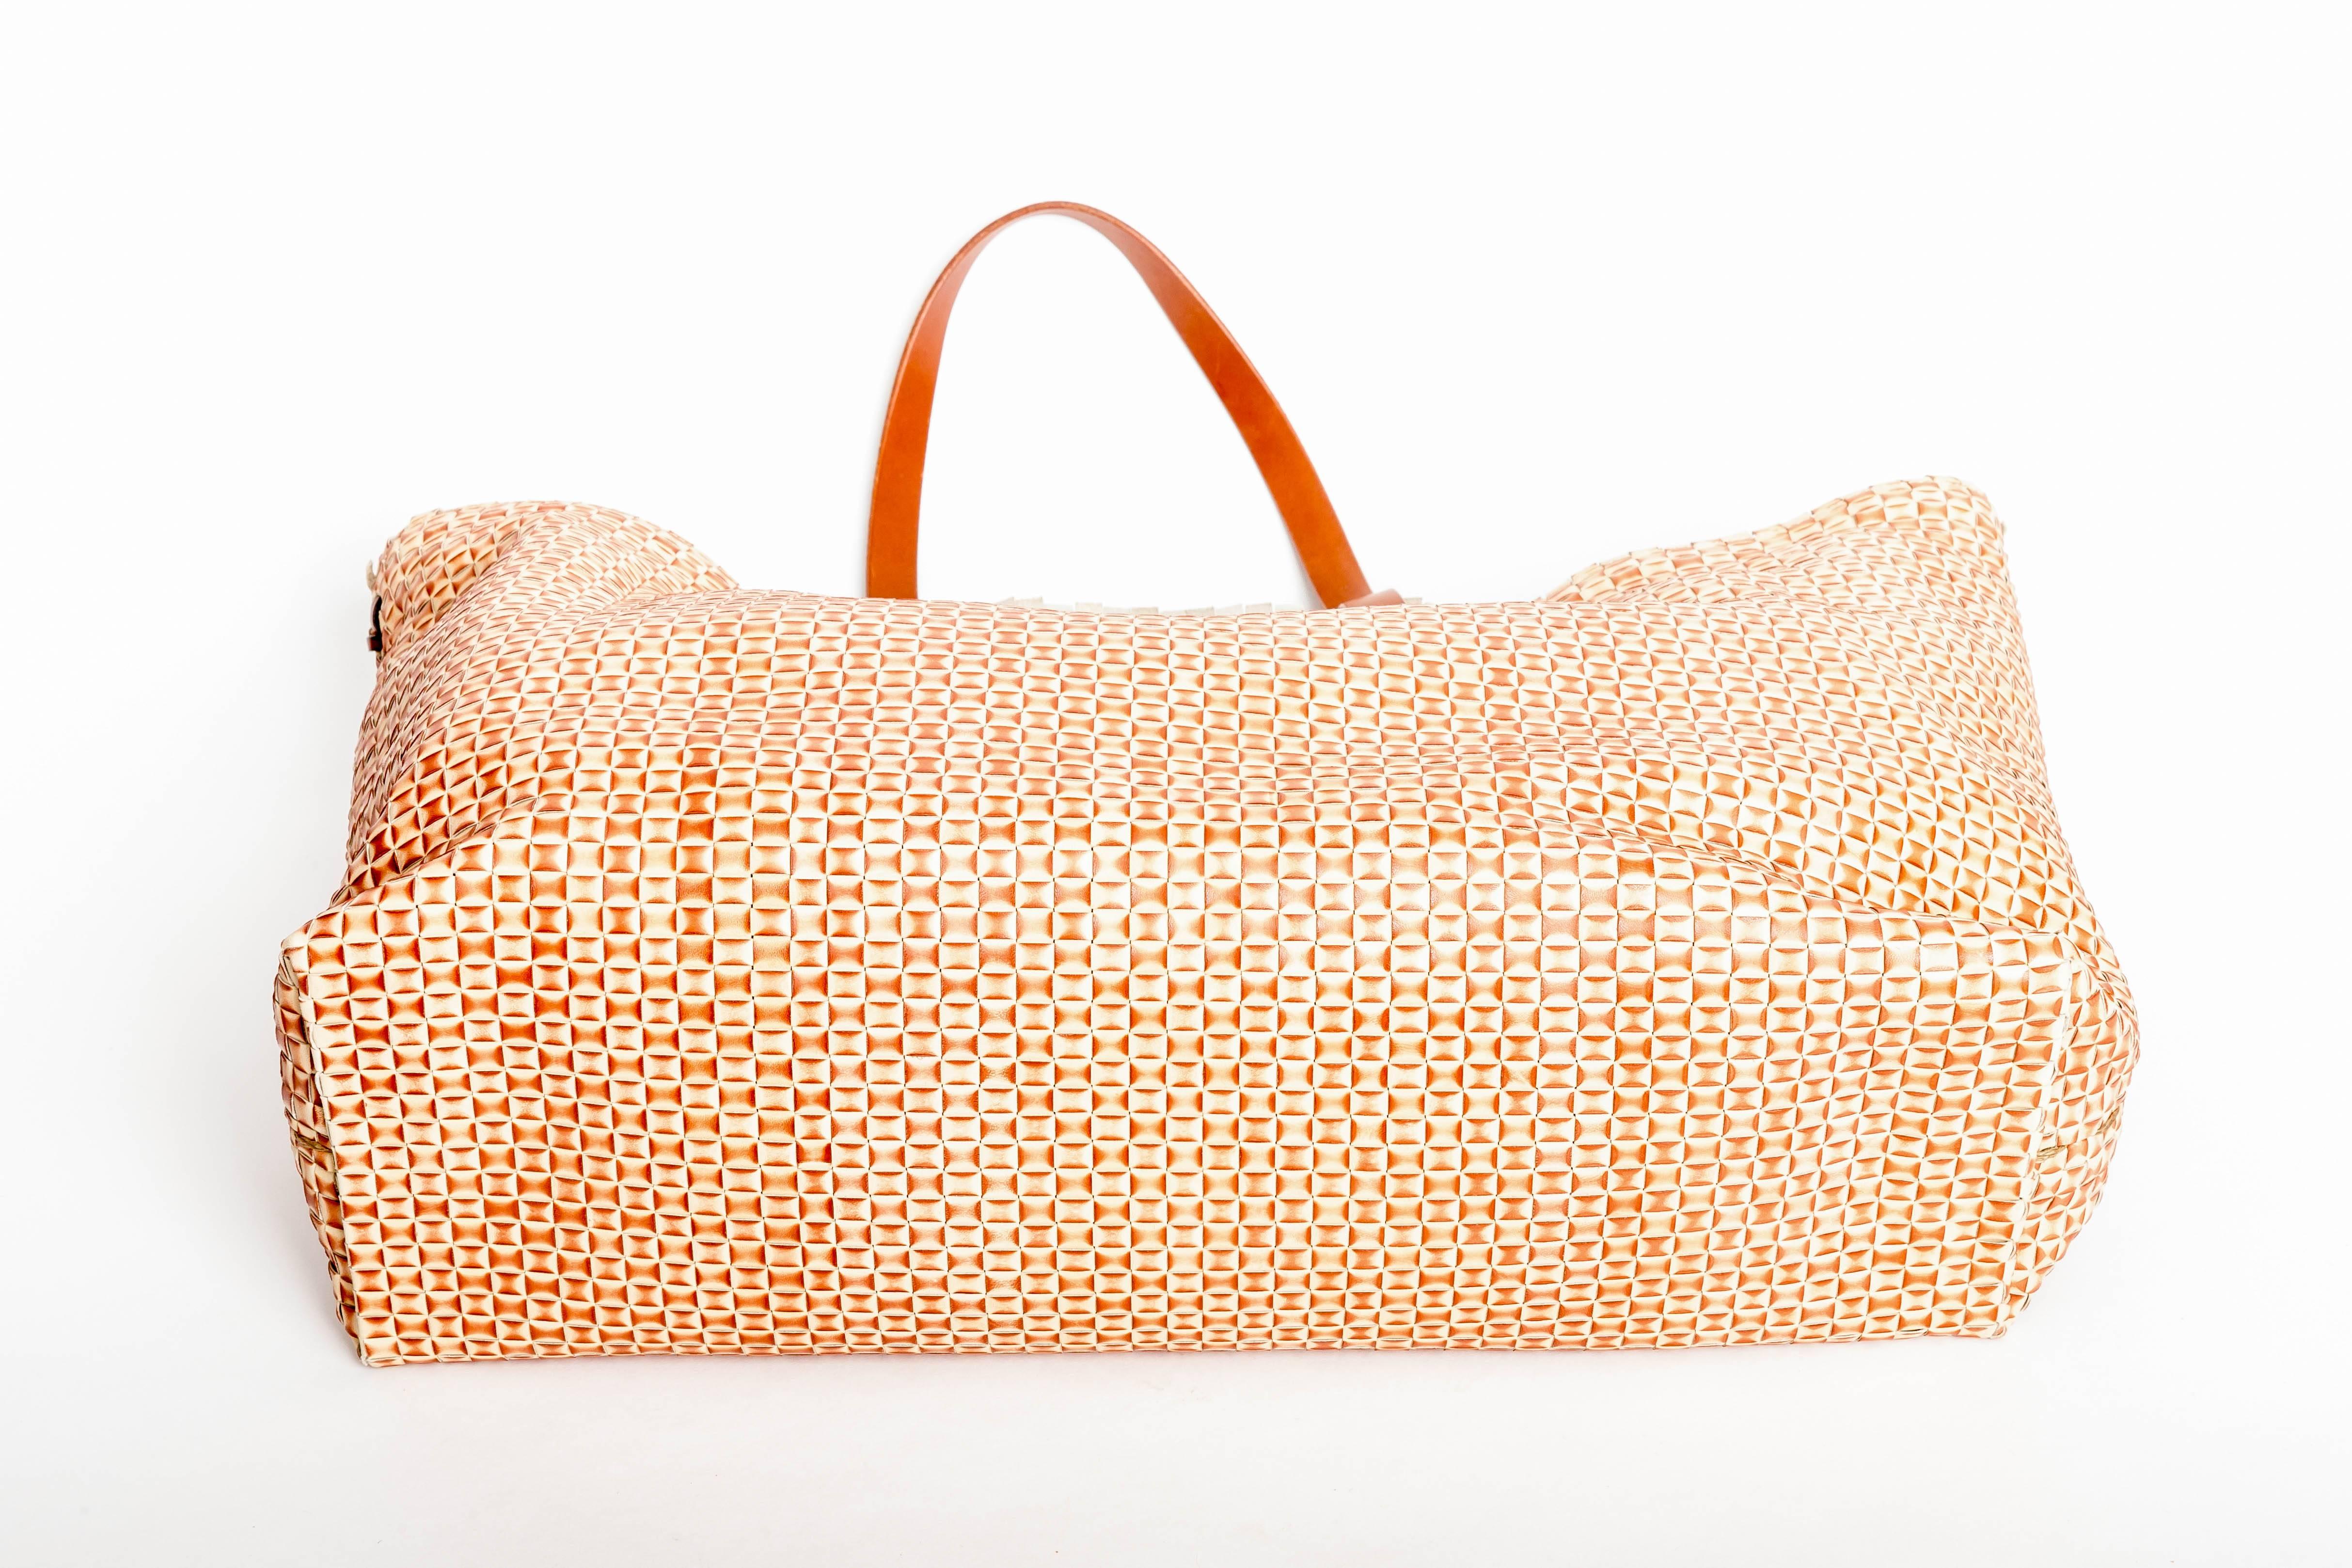 Orange Henry Cuir Woven Leather Tote